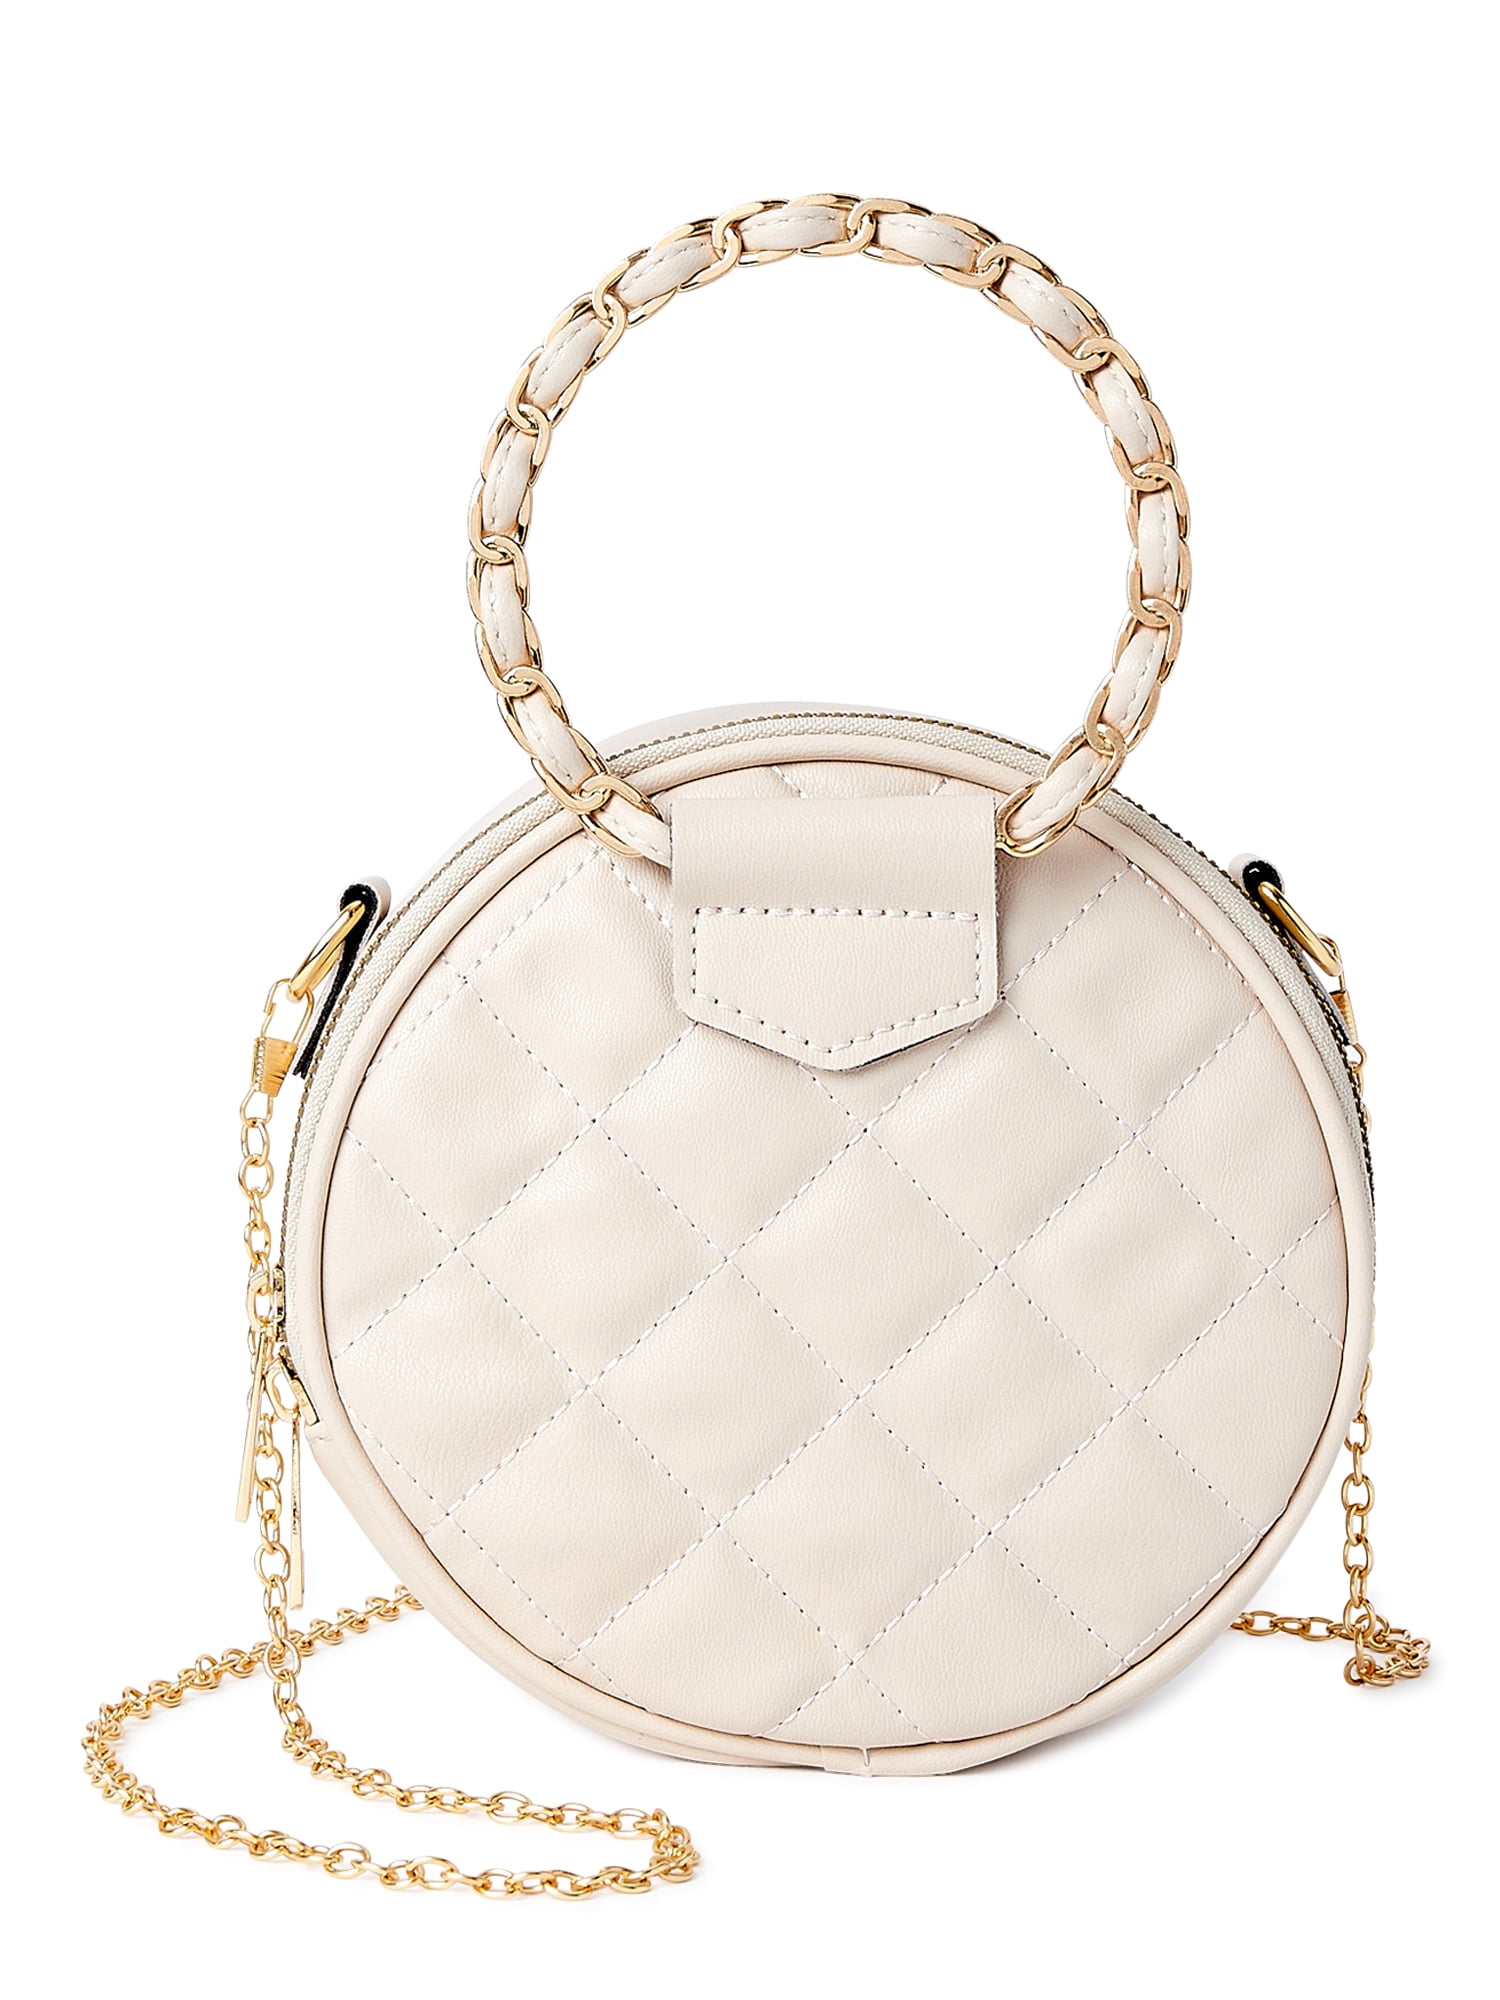 Jane & Berry Women's Round Quilted Faux Leather Crossbody Handbag Beige